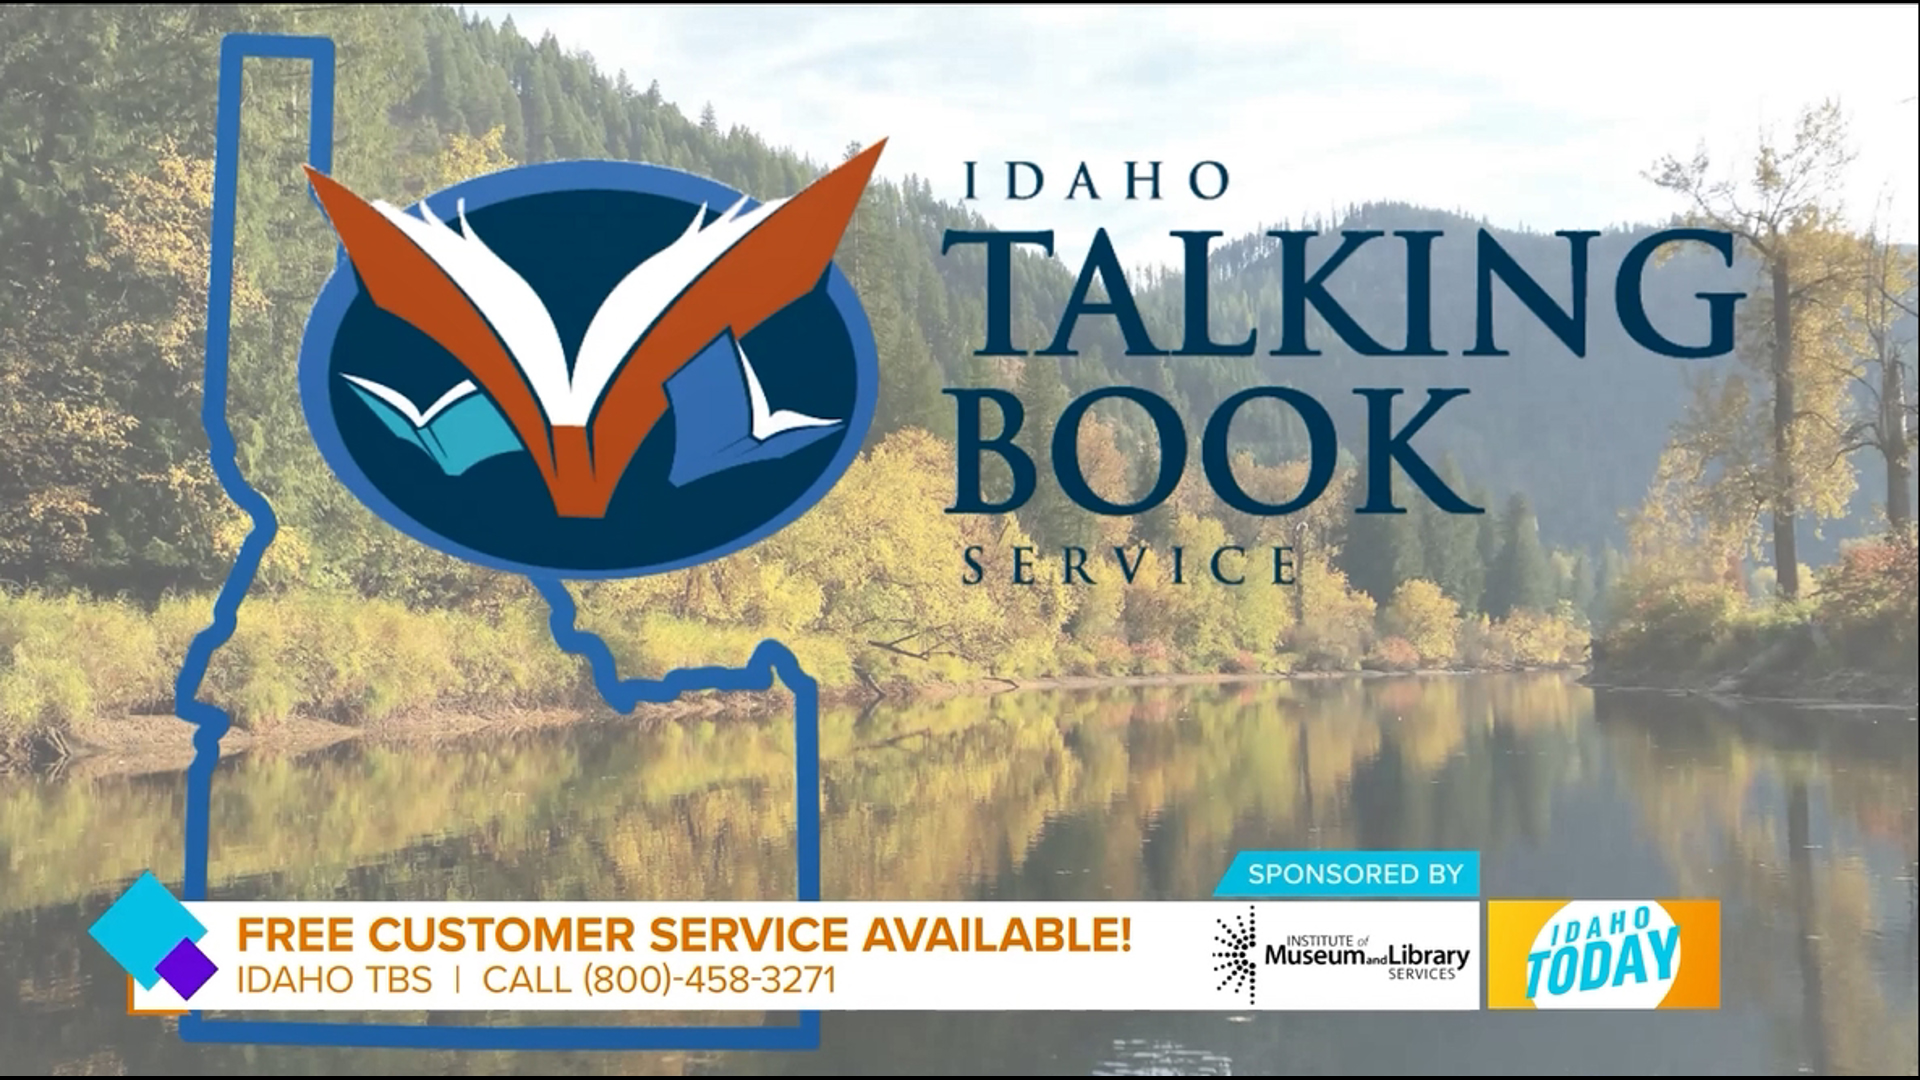 Sponsored by The Idaho Commission for Libraries. TBS is a library service that offers audio books & magazines at no cost to any resident in Idaho.